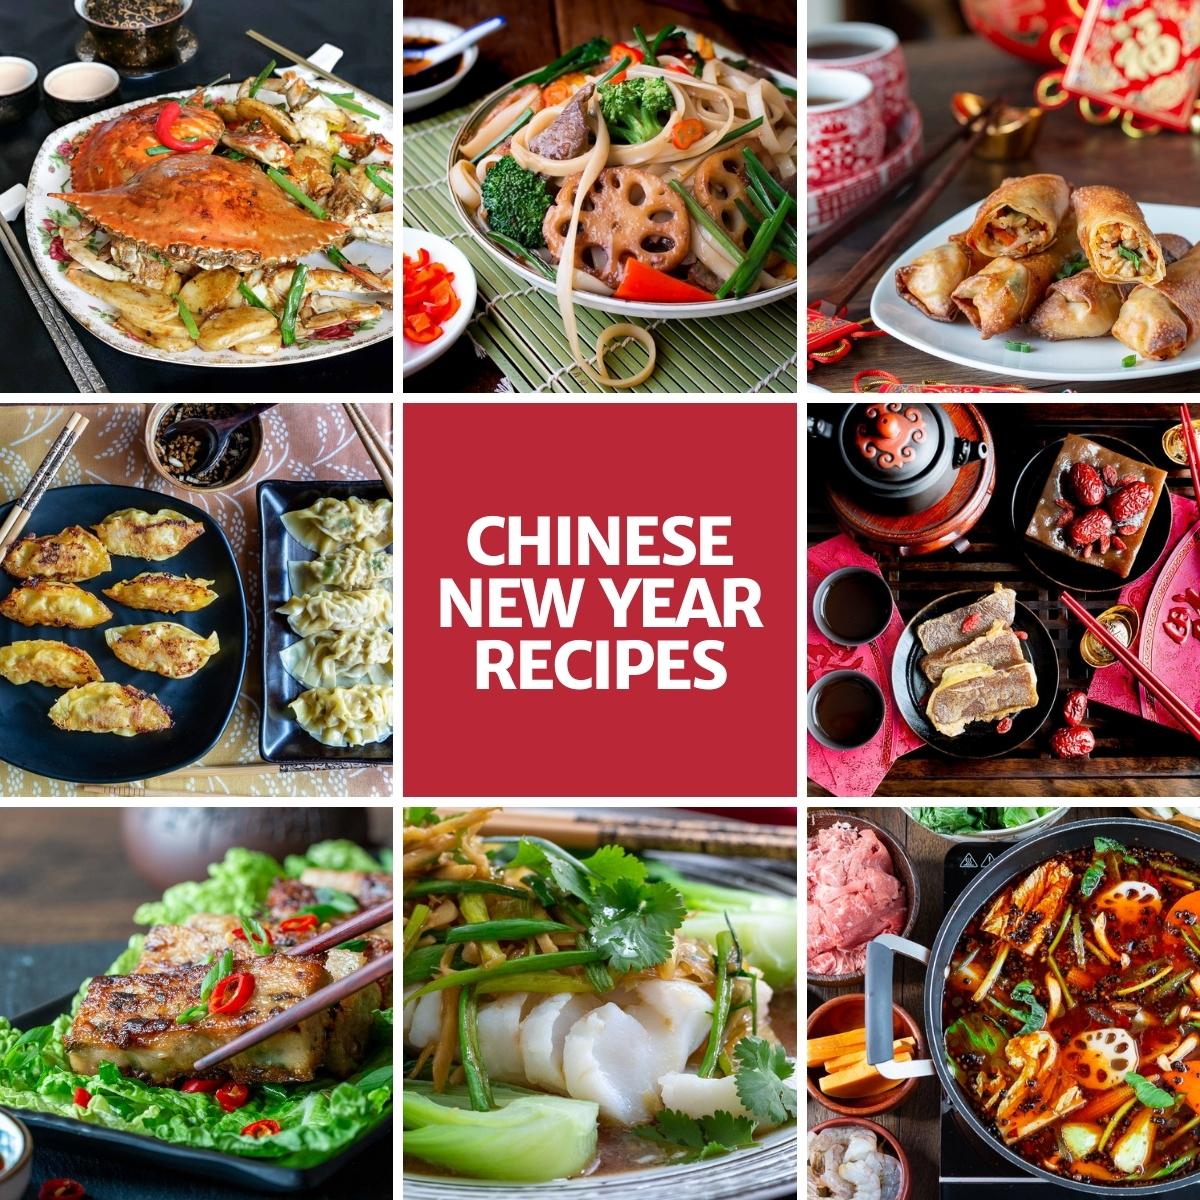 Symbolic Lunar New Year Food and Recipes